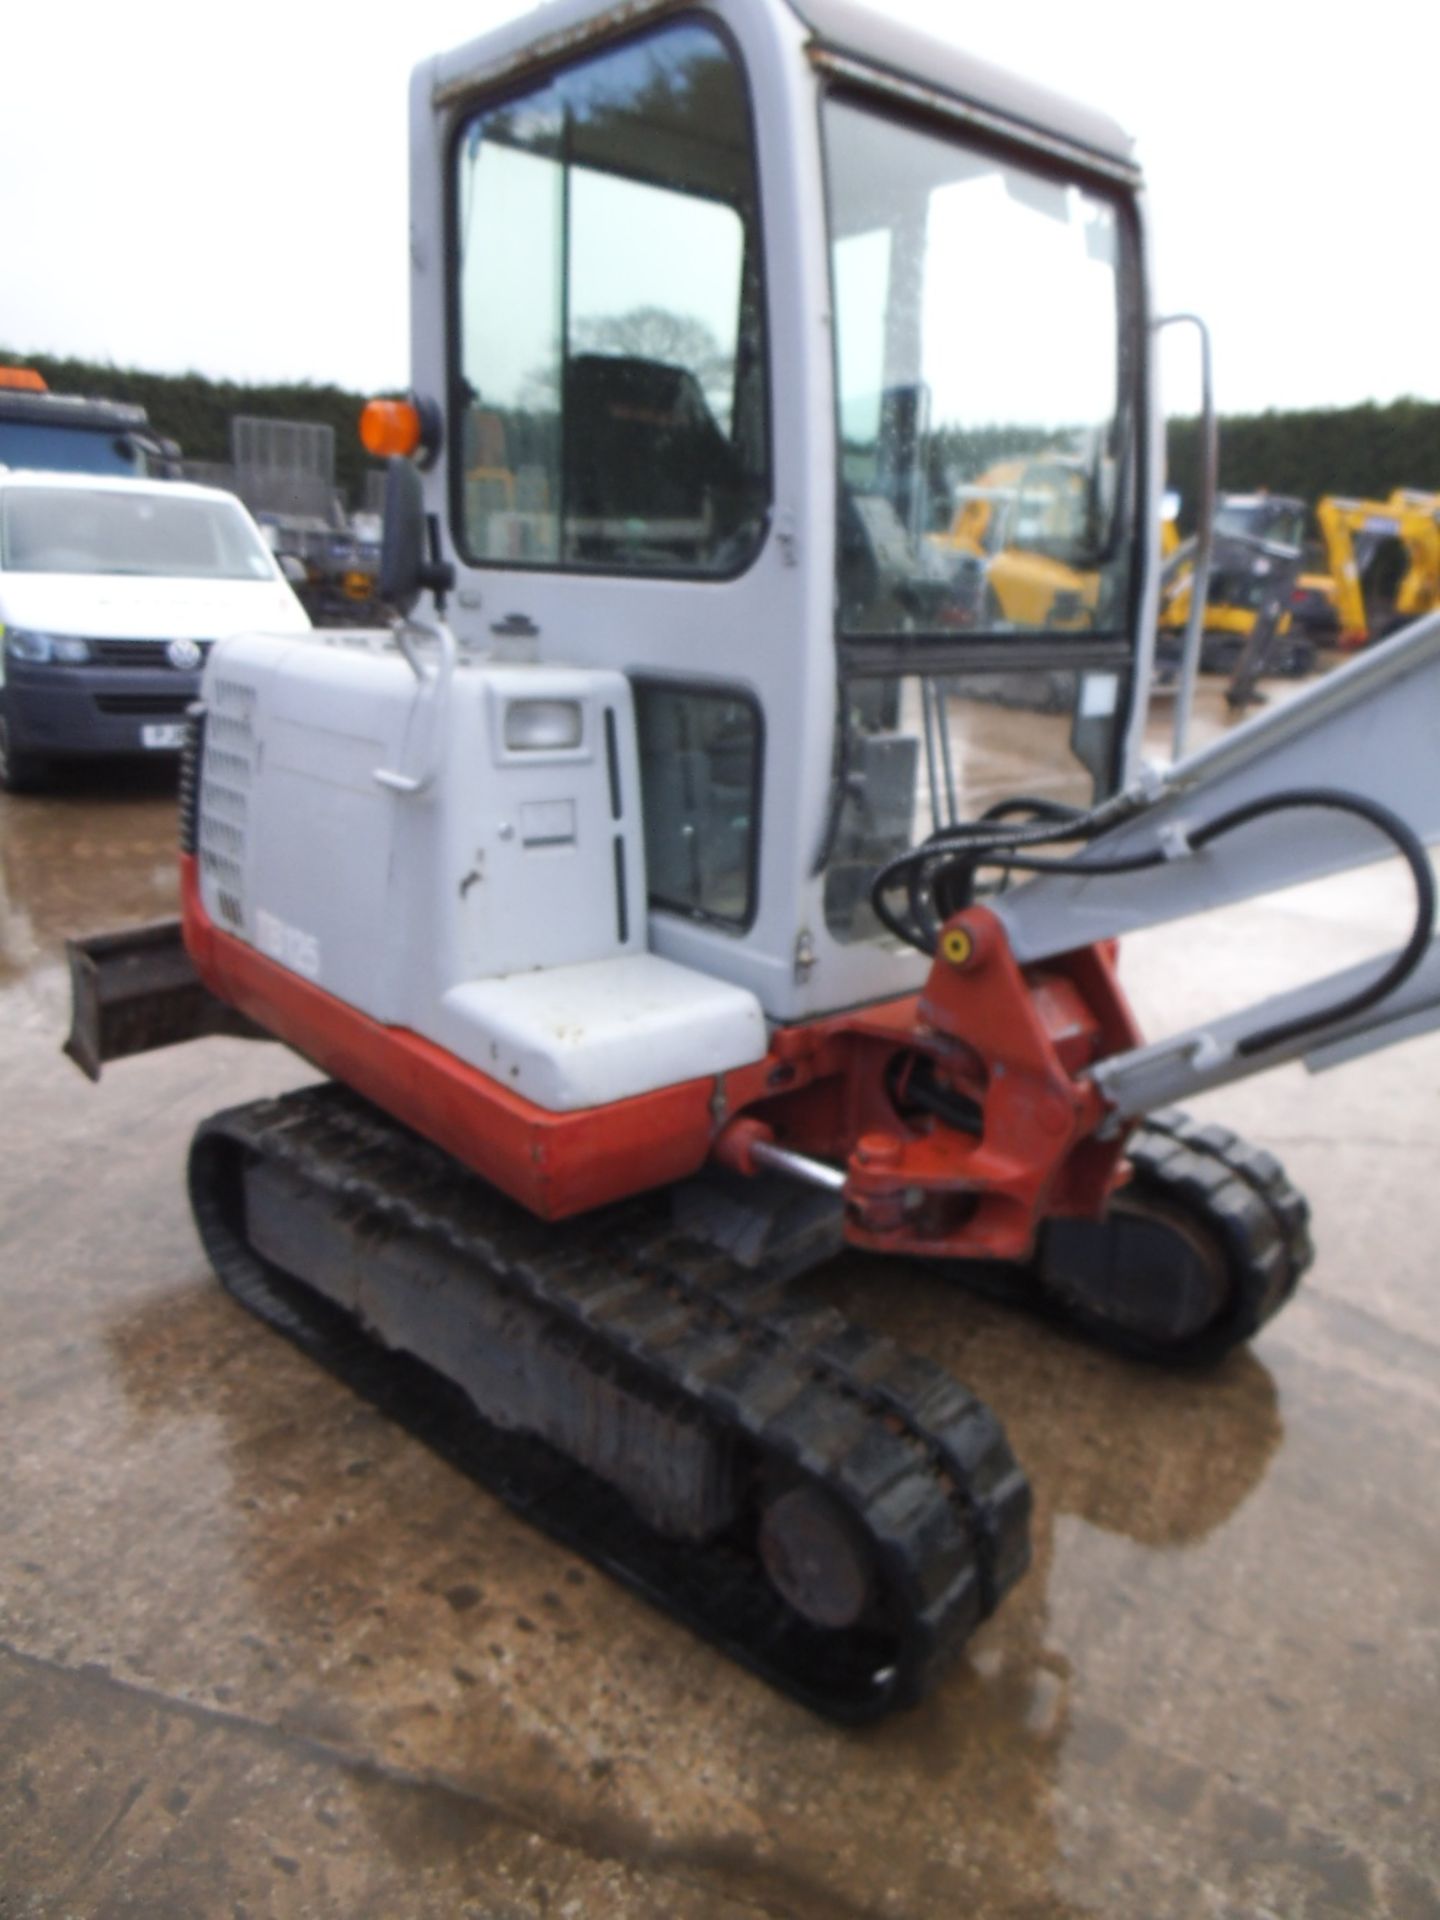 Takeuchi TB125 Tracked Excavator, Capacity: 3 Ton, Year of Manufacture: 2006, Hours: 2889  c/w 12in - Image 3 of 8